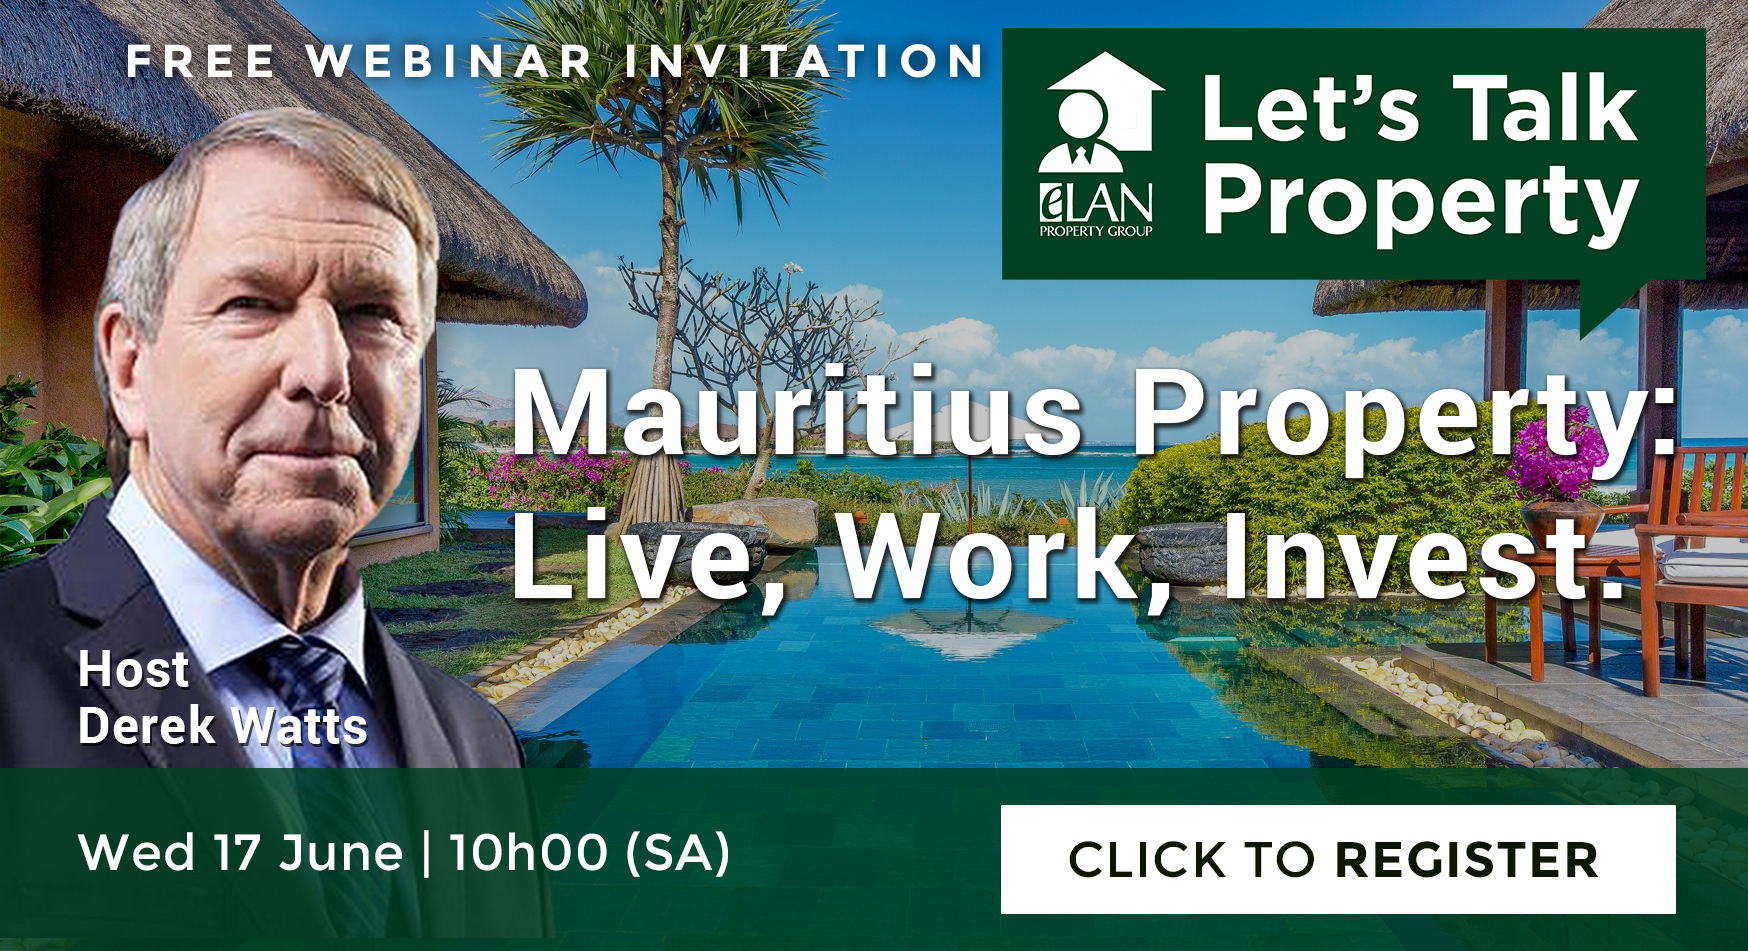 Mauritius Property: Live, Work, Invest